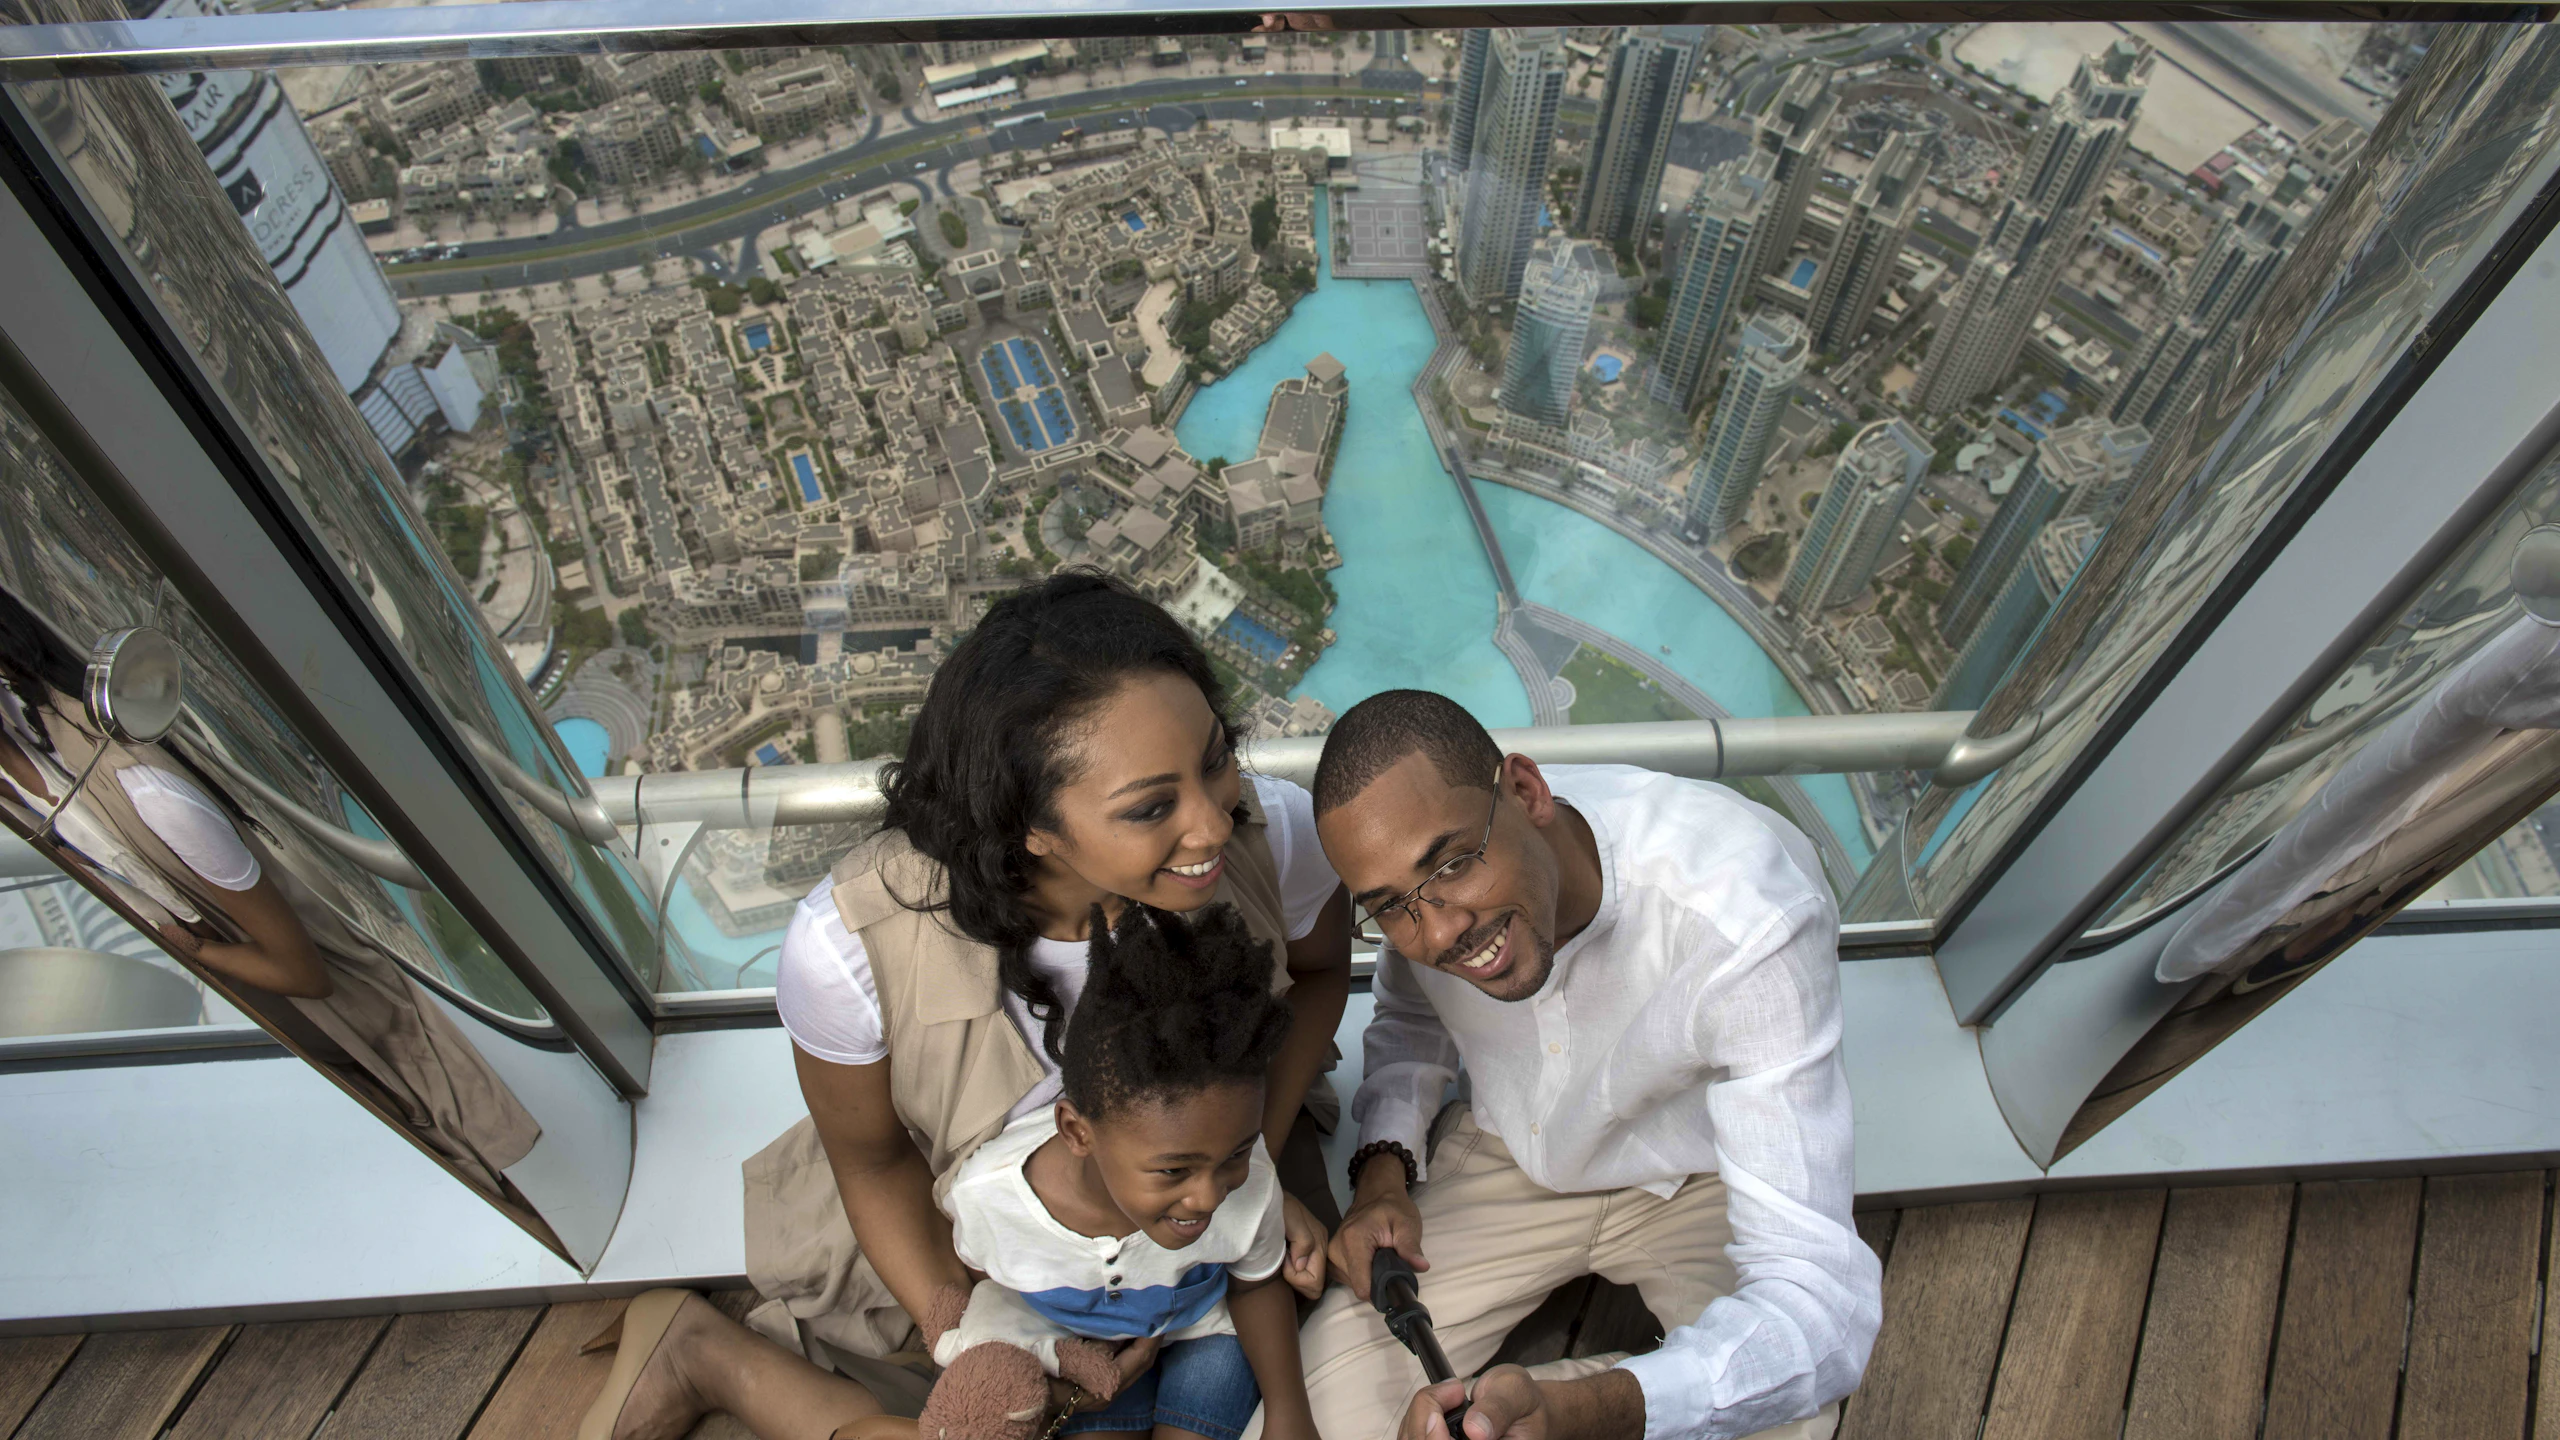 Burj Khalifa: At the Top Sky with (Level 124, 125 & 148) Price